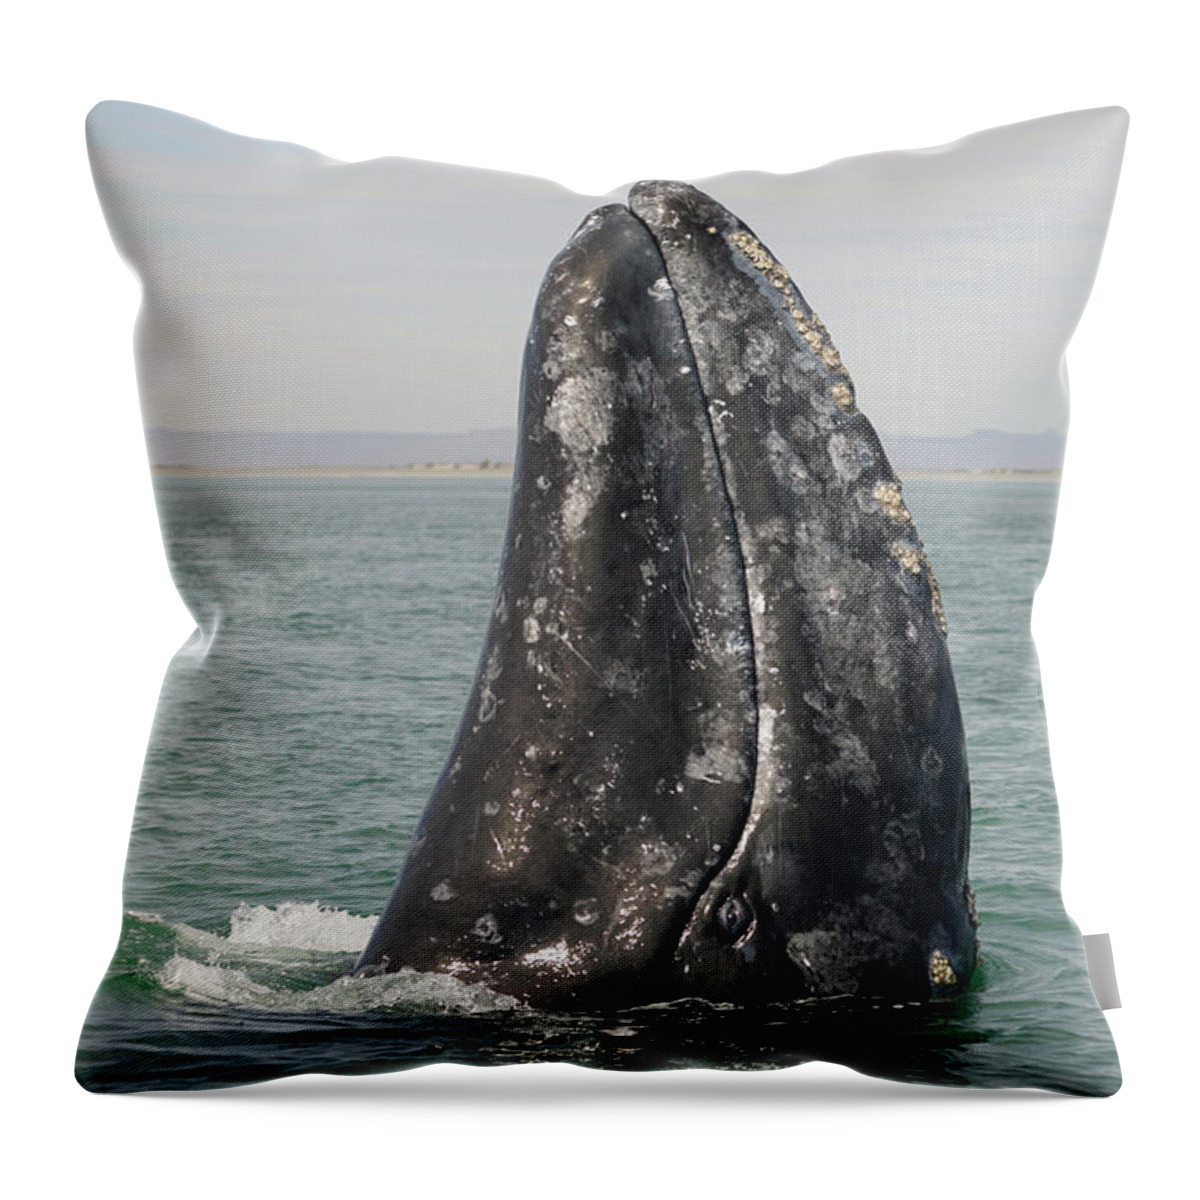 00560756 Throw Pillow featuring the photograph Gray Whale Spyhopping by Hiroya Minakuchi